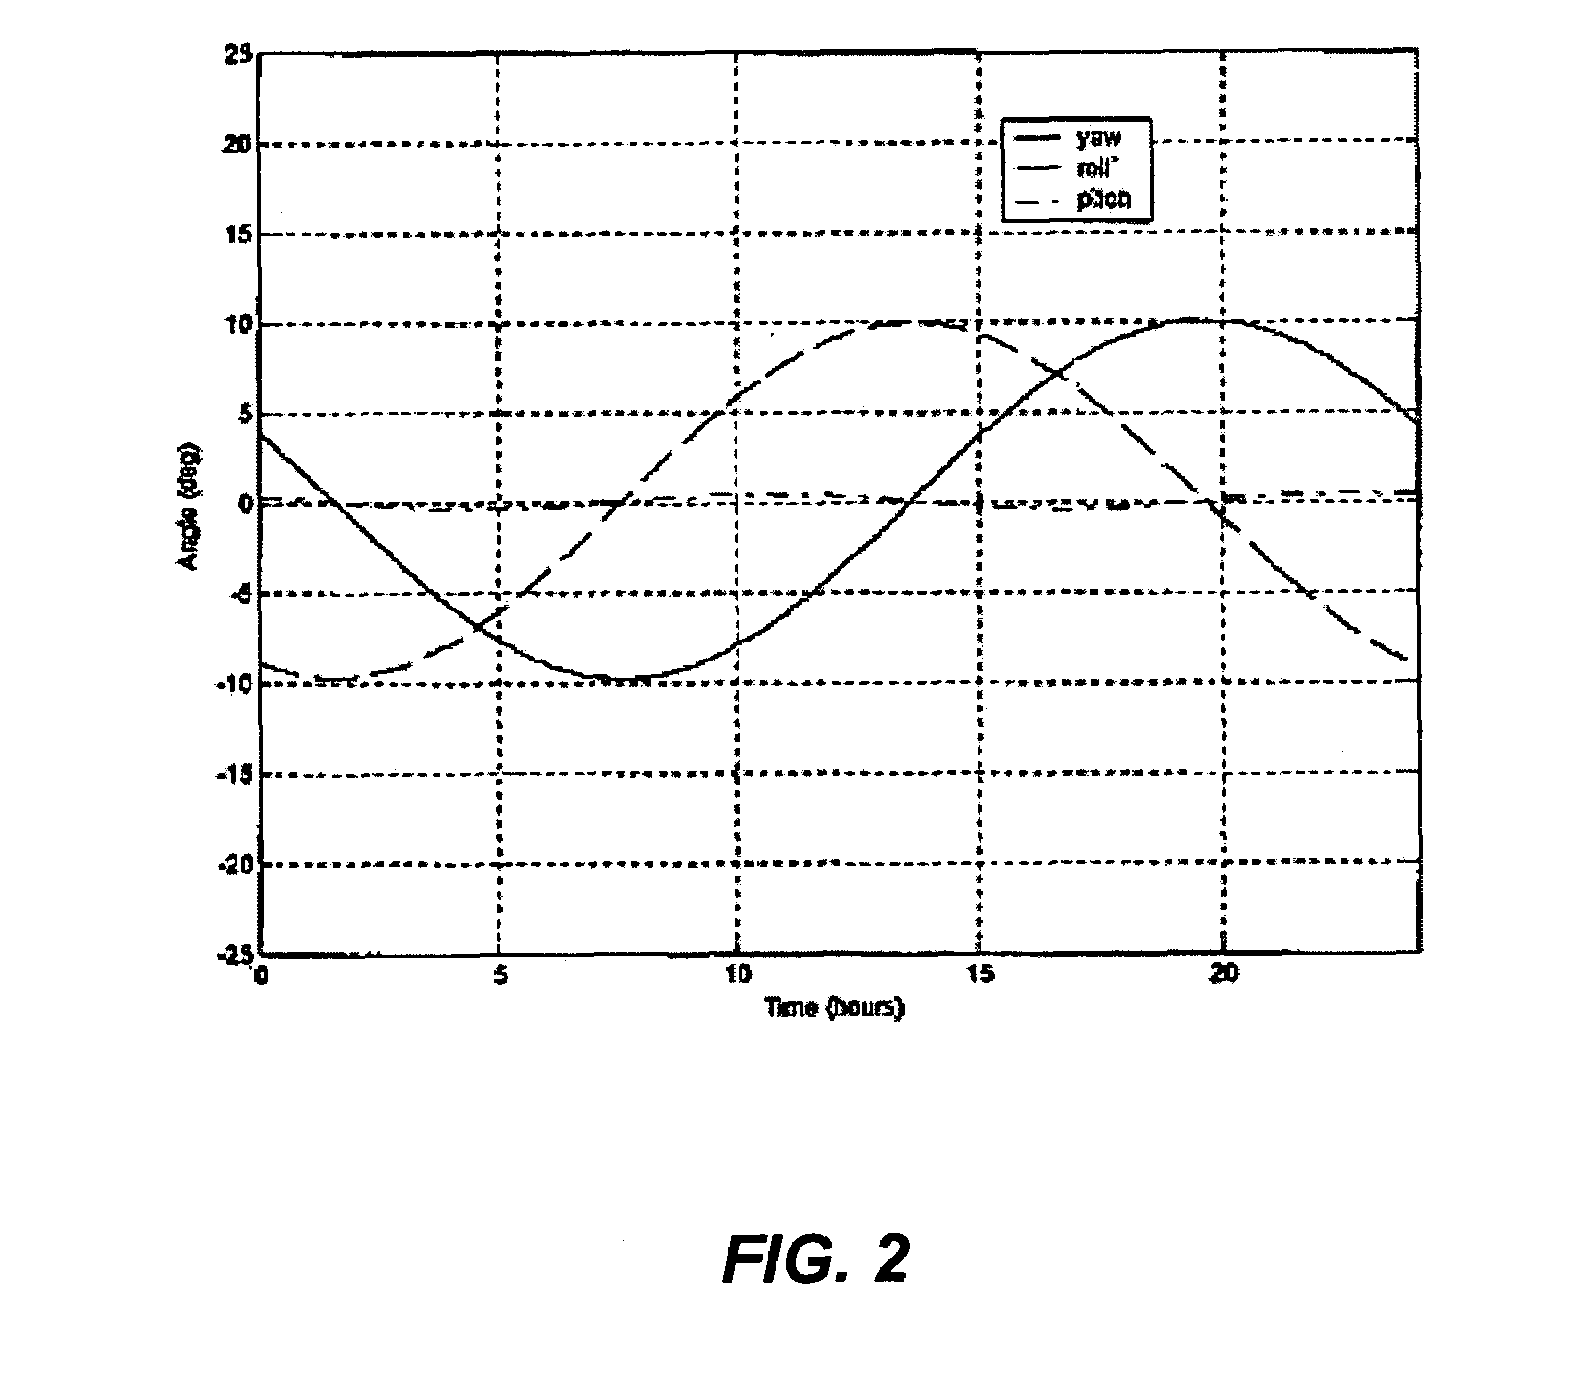 Attitude and antenna steering system for geosynchronous earth orbit (GEO) spacecraft